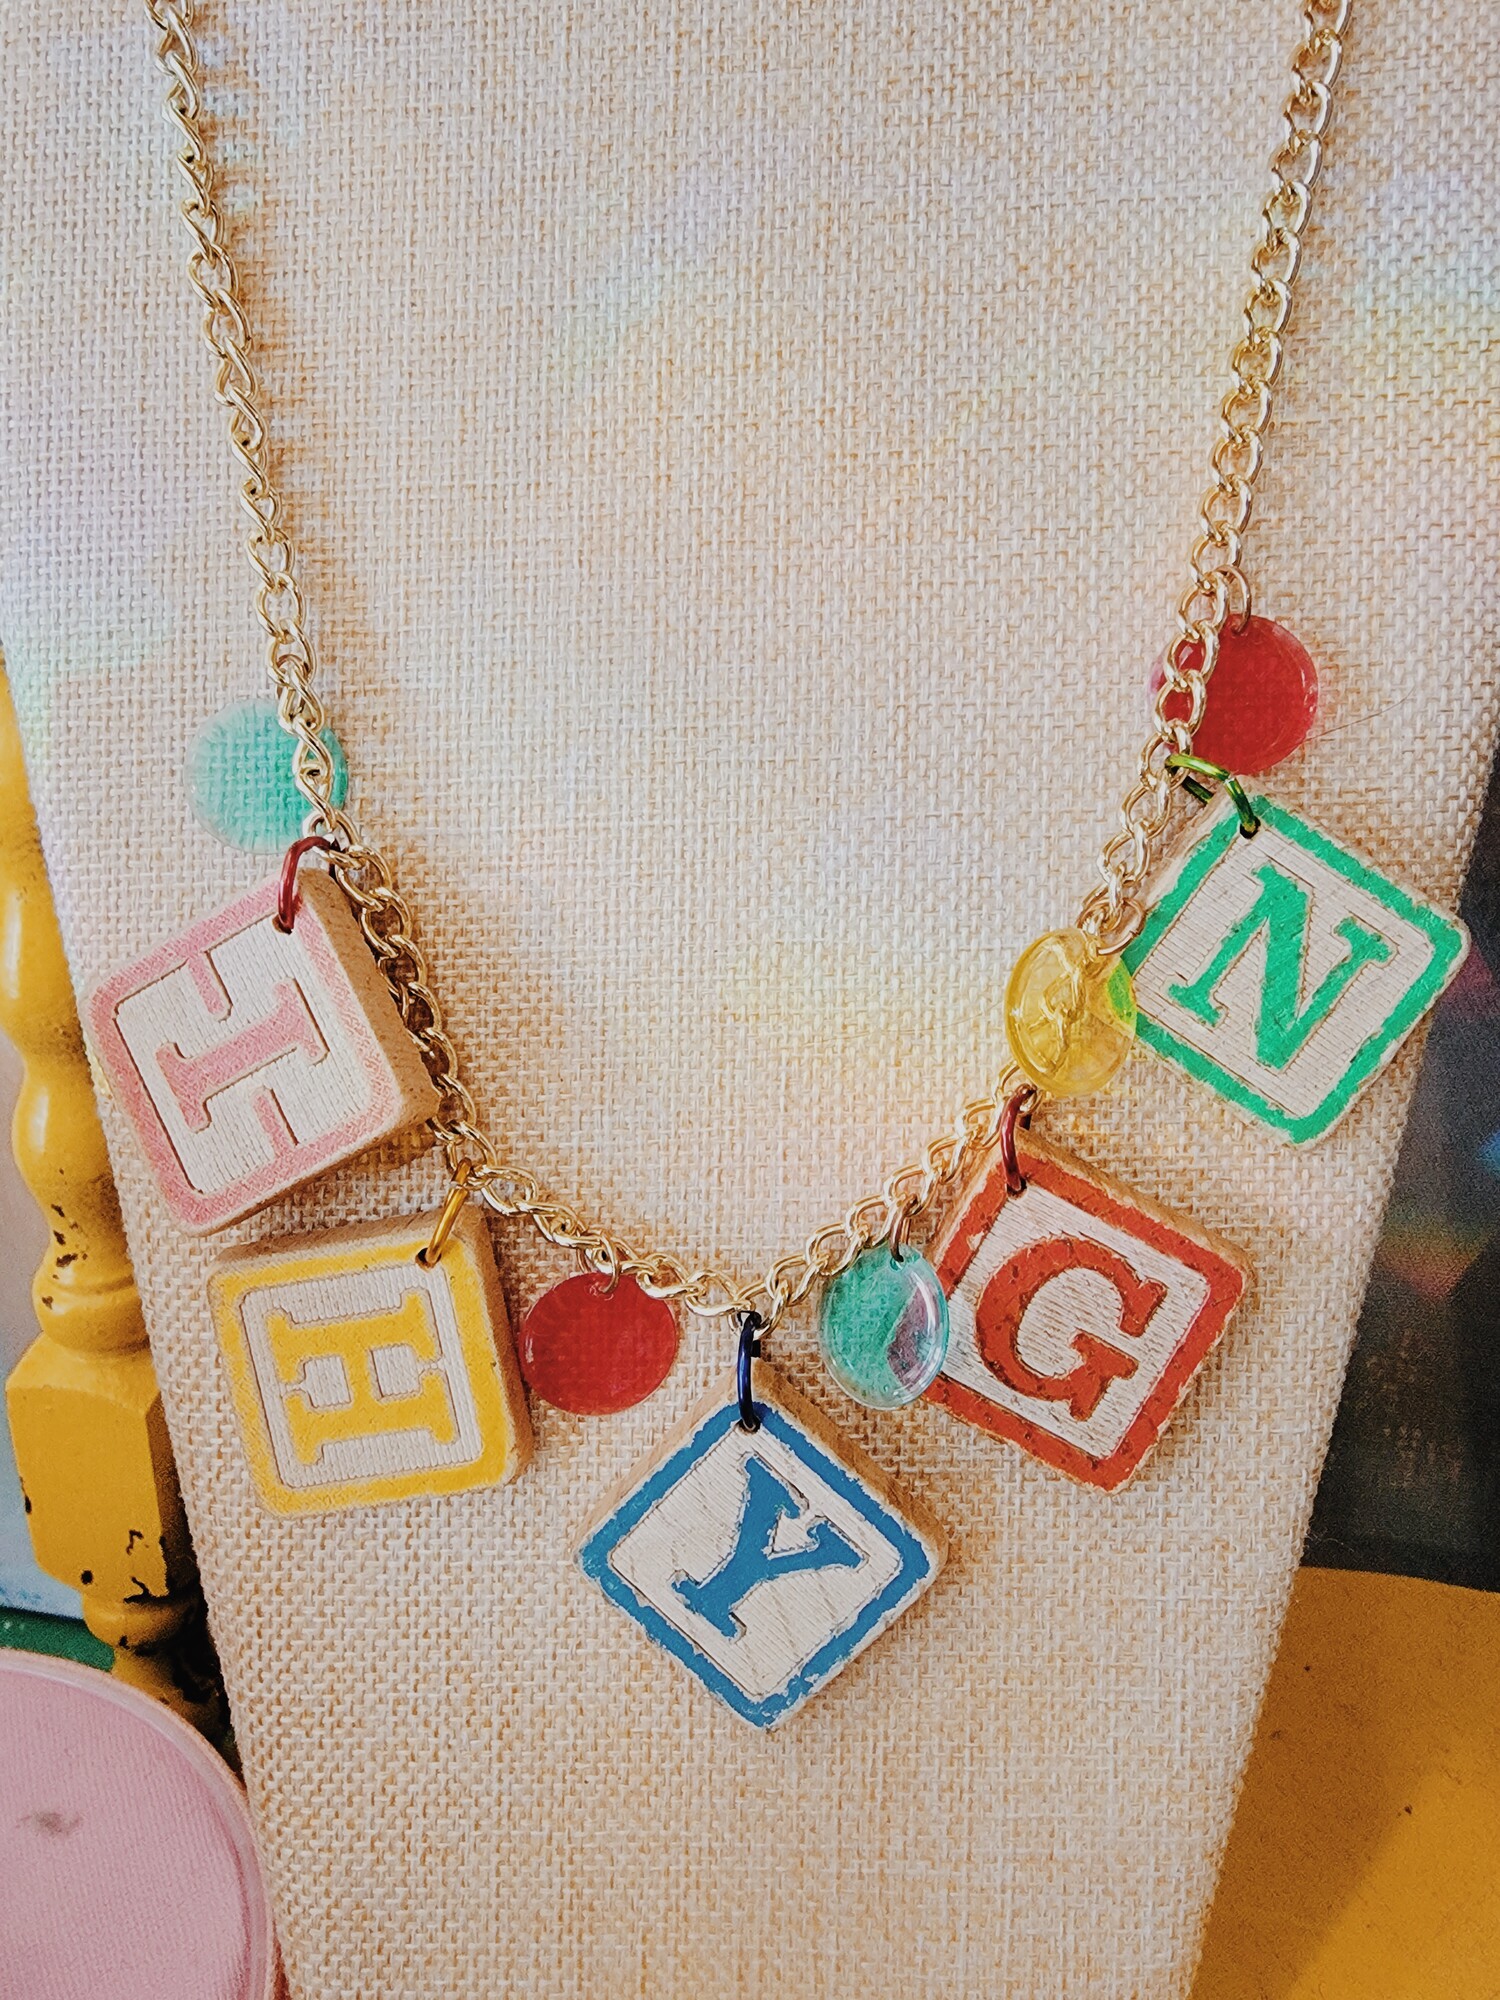 This Kelli Hawk Designs necklace is truly one of a kind! With game pieces as the centerpiece, this necklace is perfect for those who love to be unique! It hangs on a 21 inch chain.